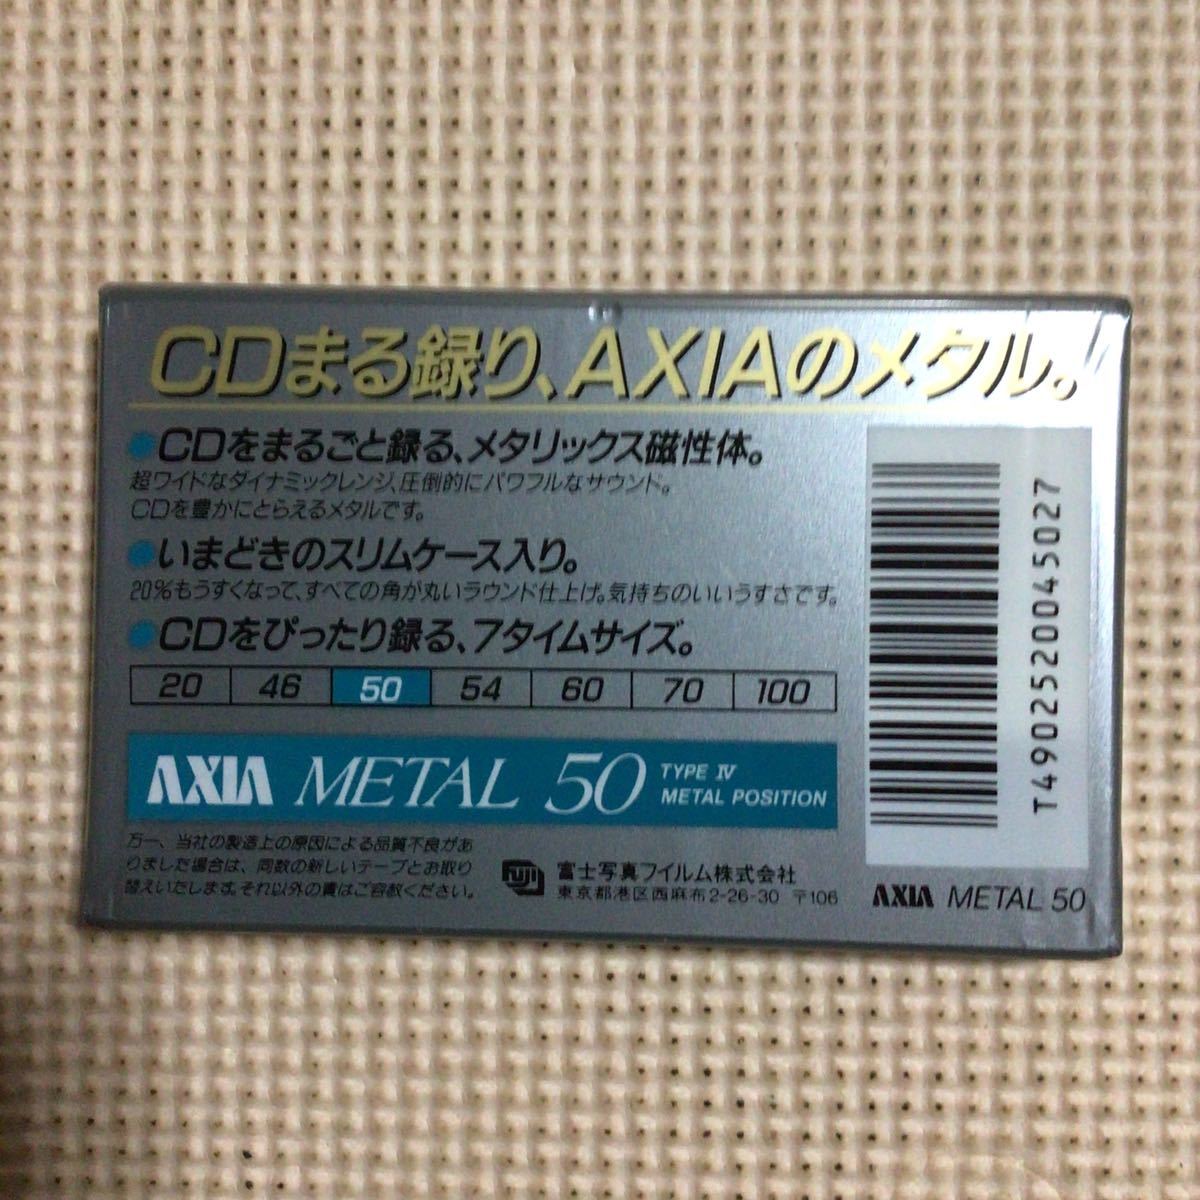 AXIA METAL 50 metal position cassette tape [ unopened new goods ]##